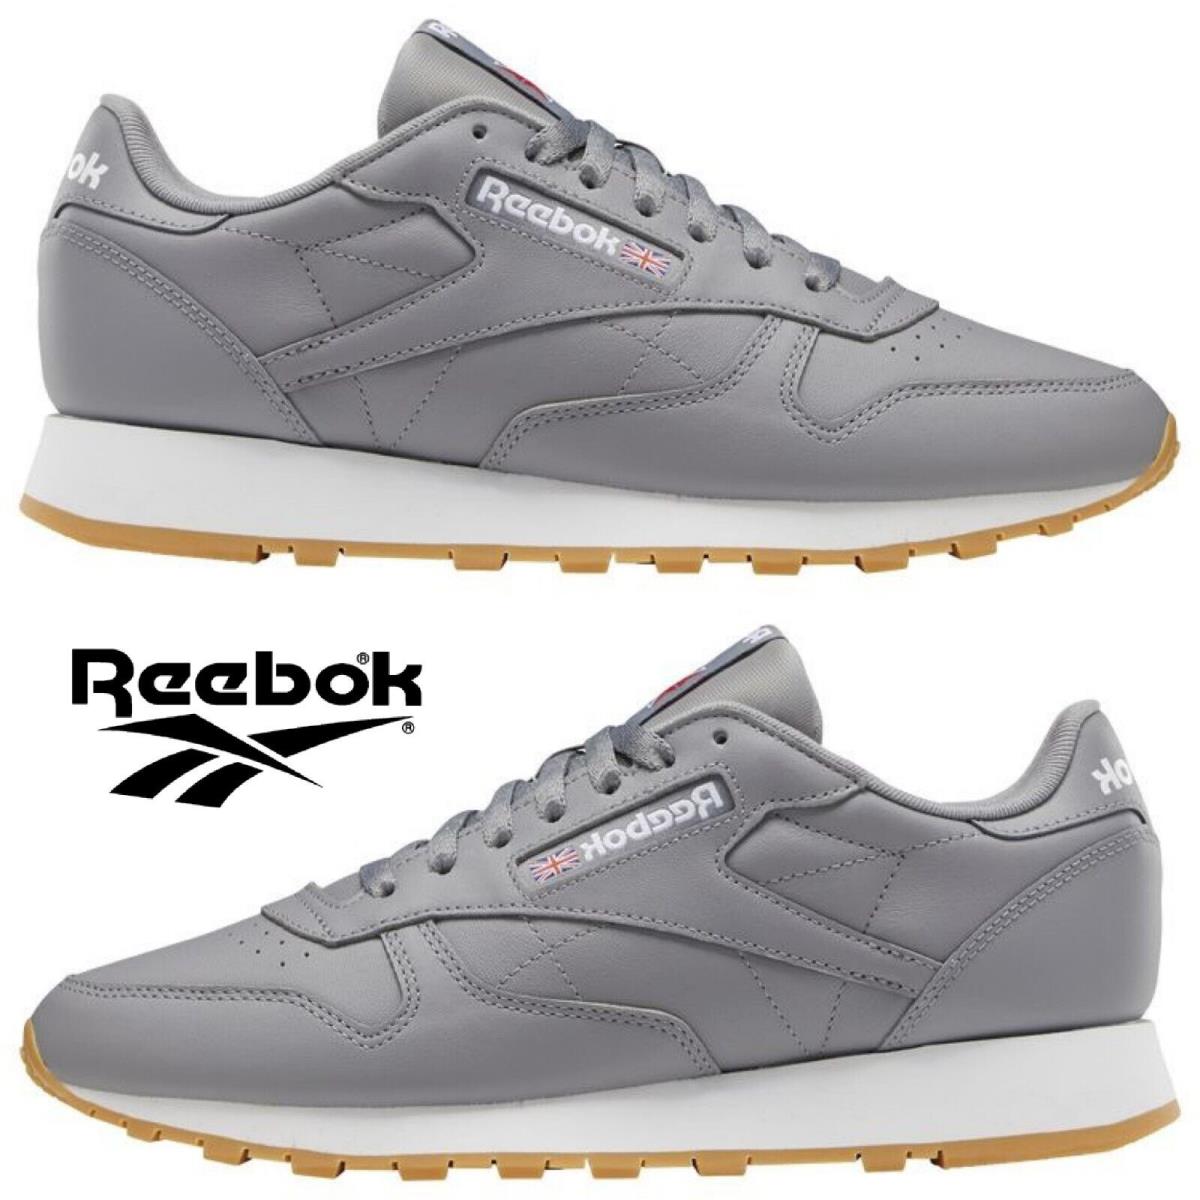 Reebok Classic Leather Running Shoes Men`s Sneakers Running Training Sport Gray - Gray, Manufacturer: Grey/Brown